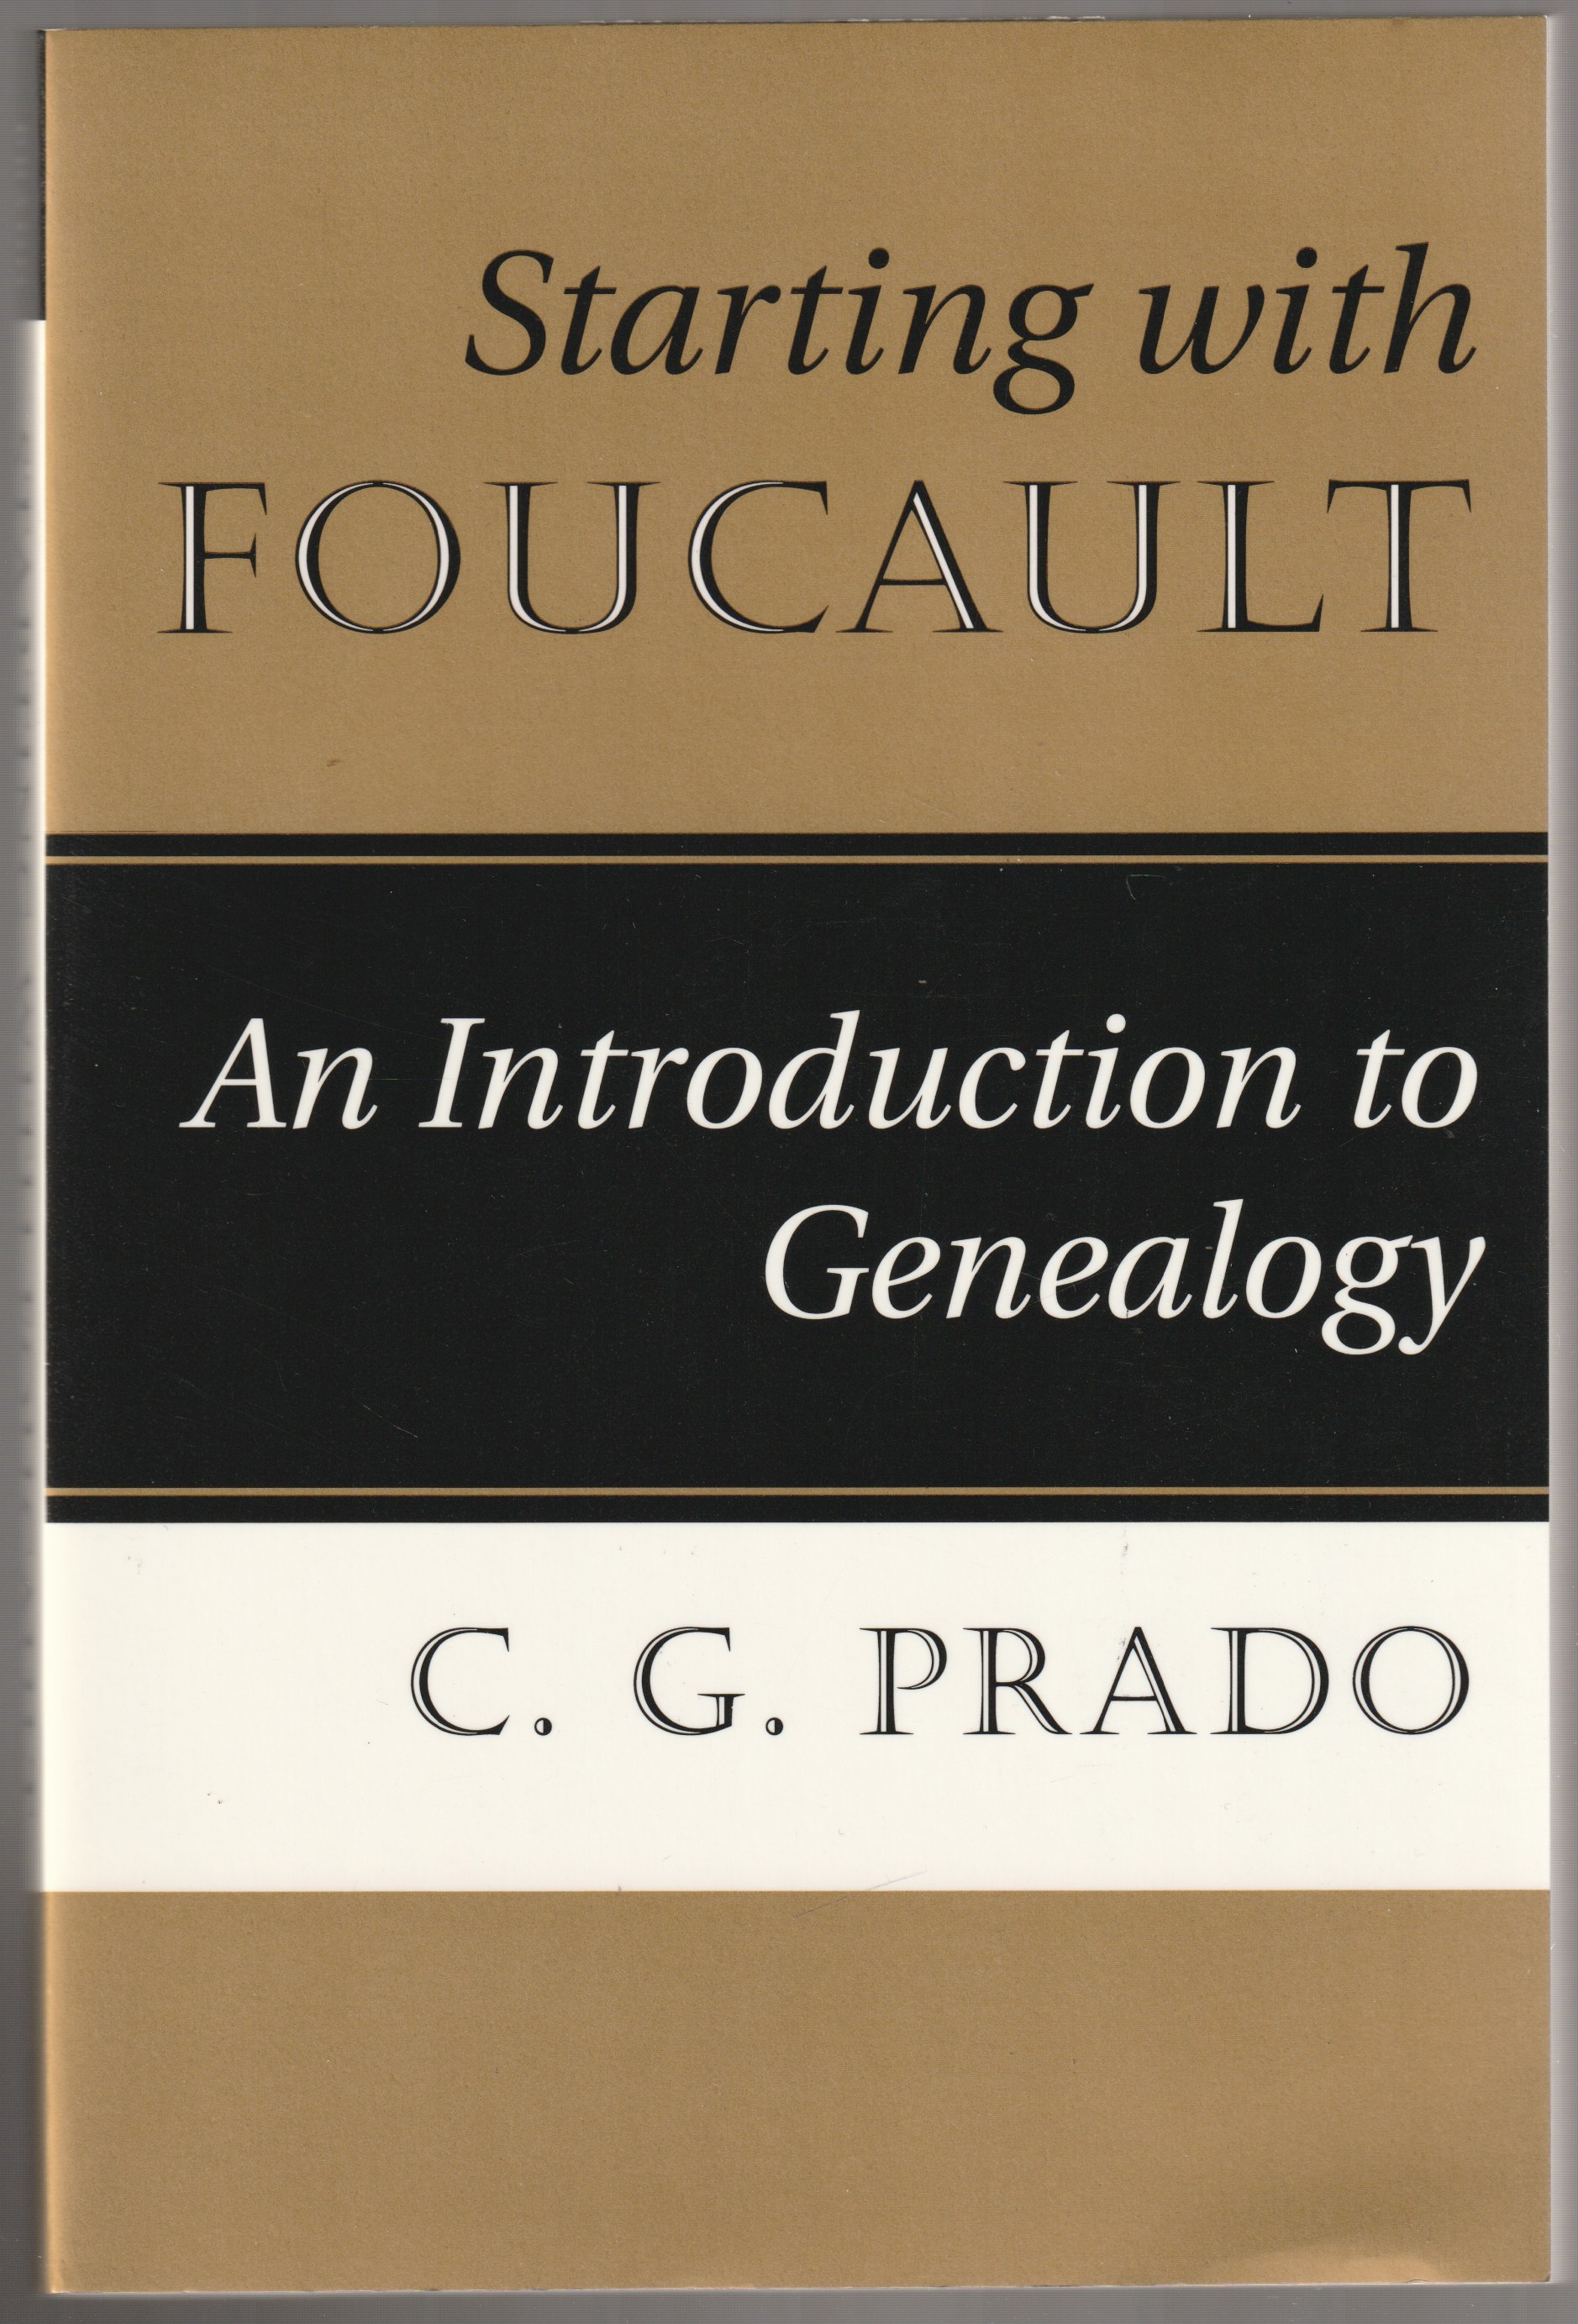 Starting with Foucault : an introduction to genealogy.